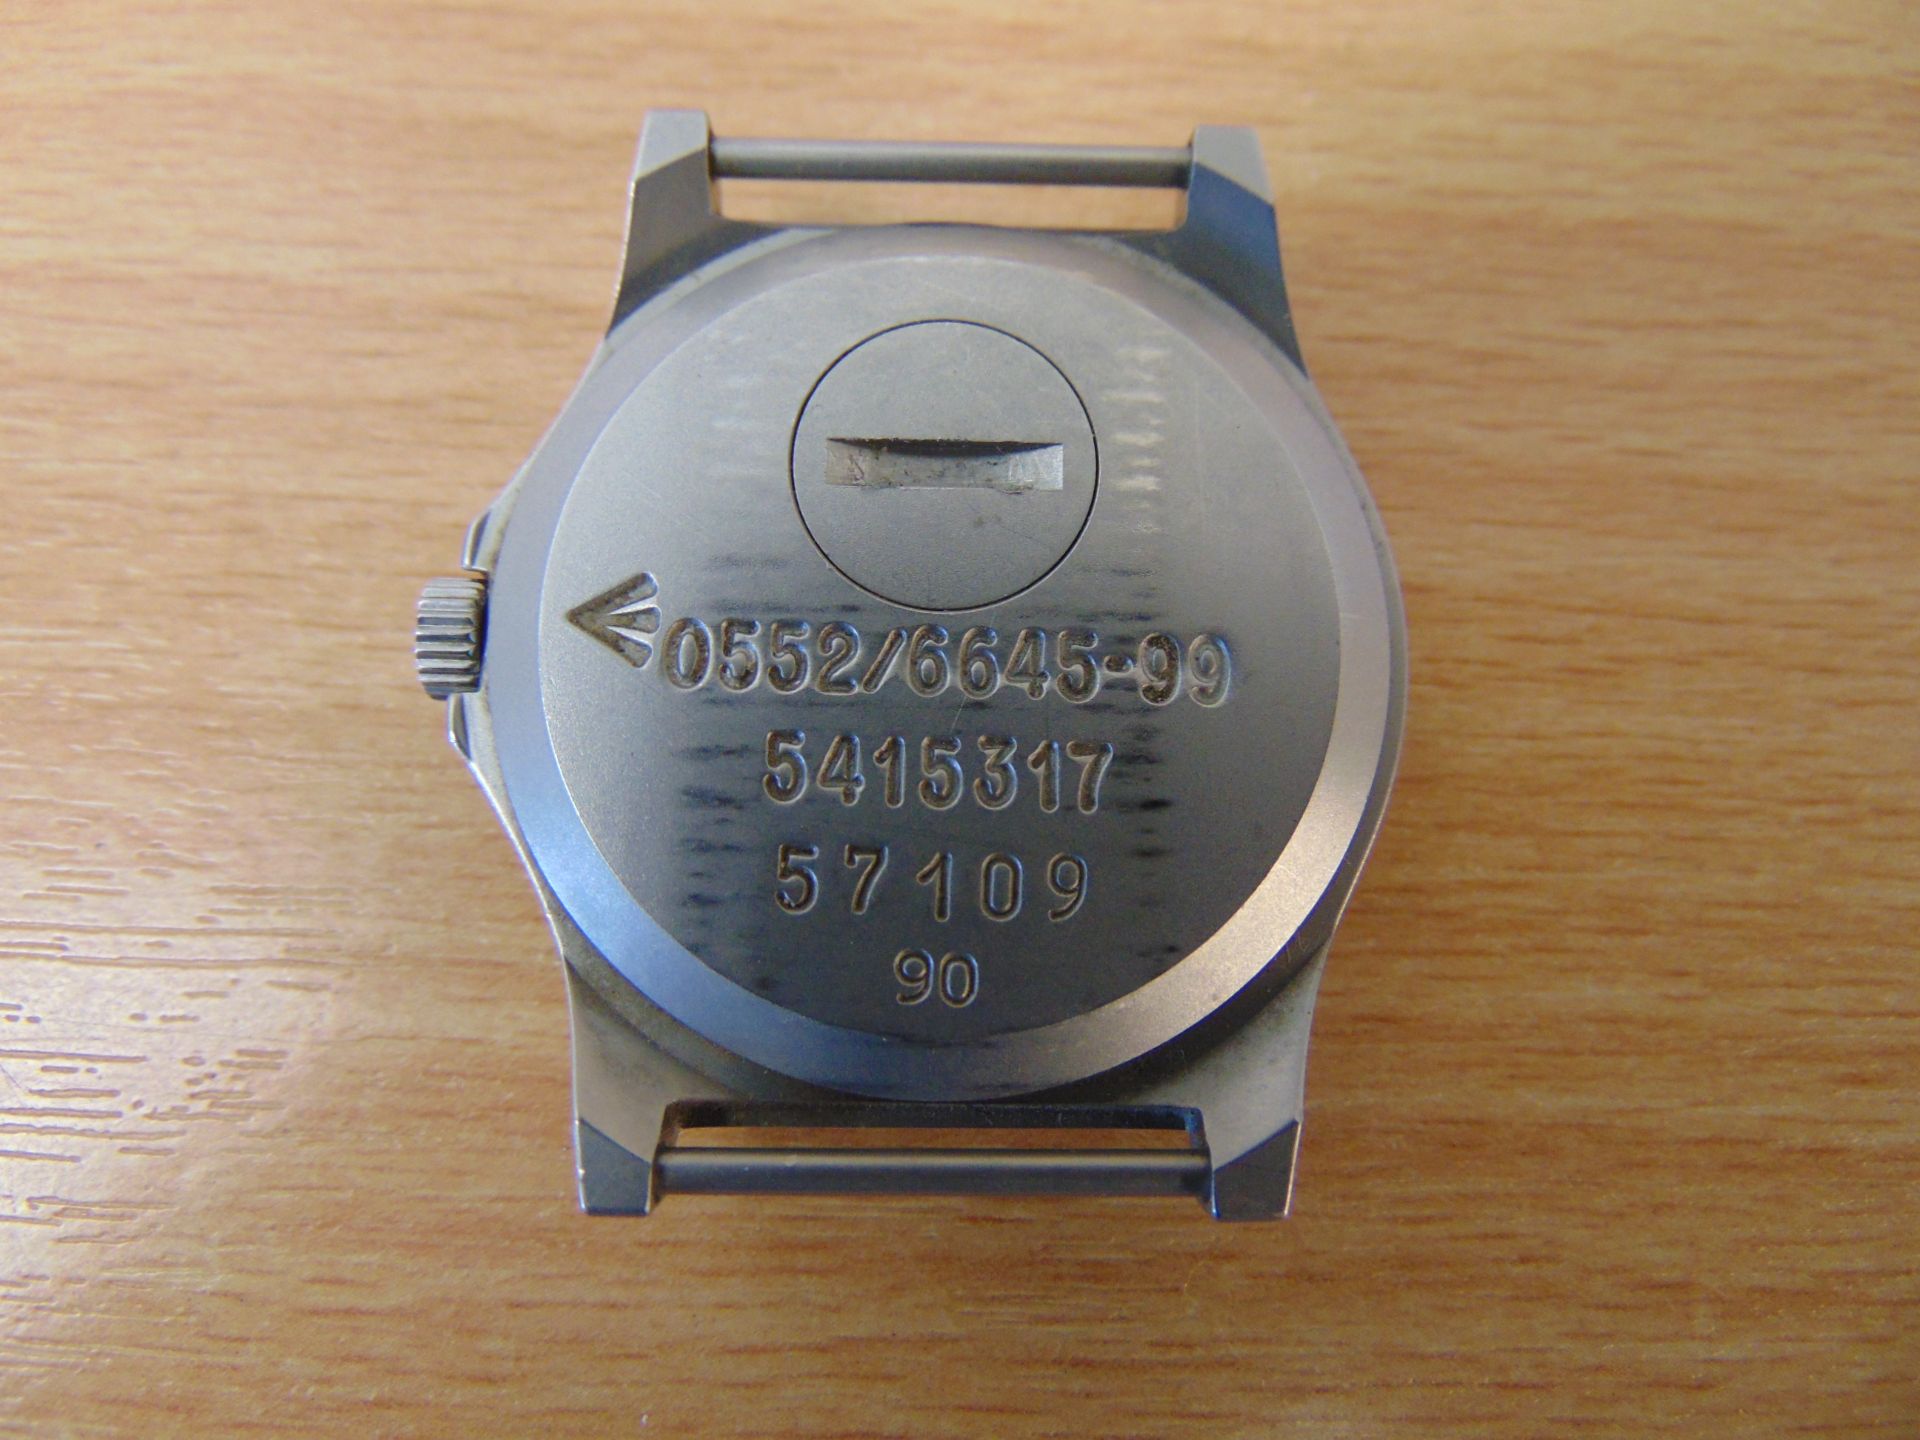 CWC 0552 Royal Marines / Navy issue service watch date 1990, GULF WAR 1 - Image 3 of 4